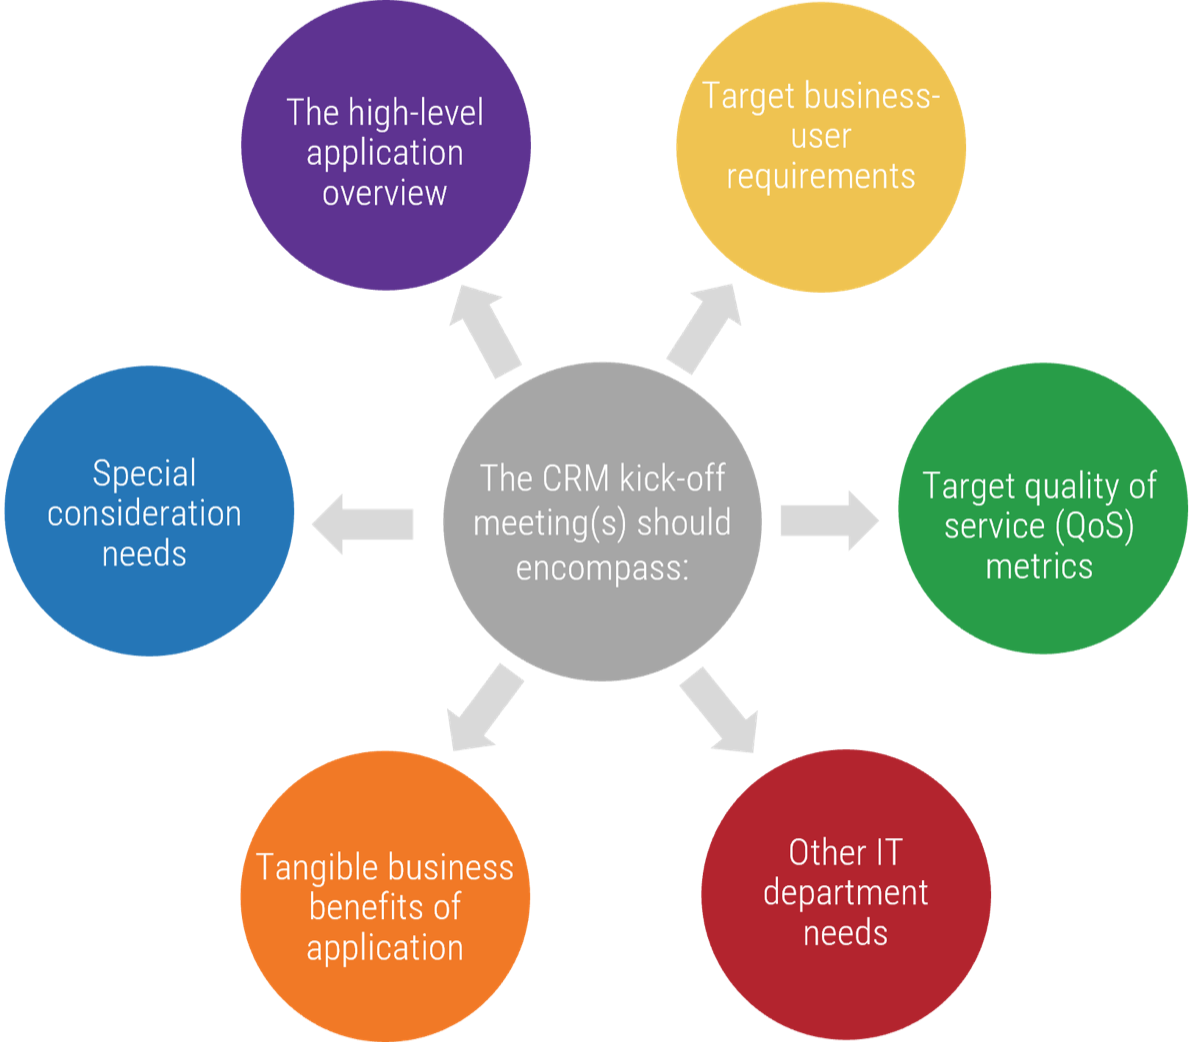 The CRM kick-off meeting(s) should encompass: 'The high-level application overview', 'Target business-user requirements', 'Target quality of service (QoS) metrics', 'Other IT department needs', 'Tangible business benefits of application', 'Special consideration needs'.